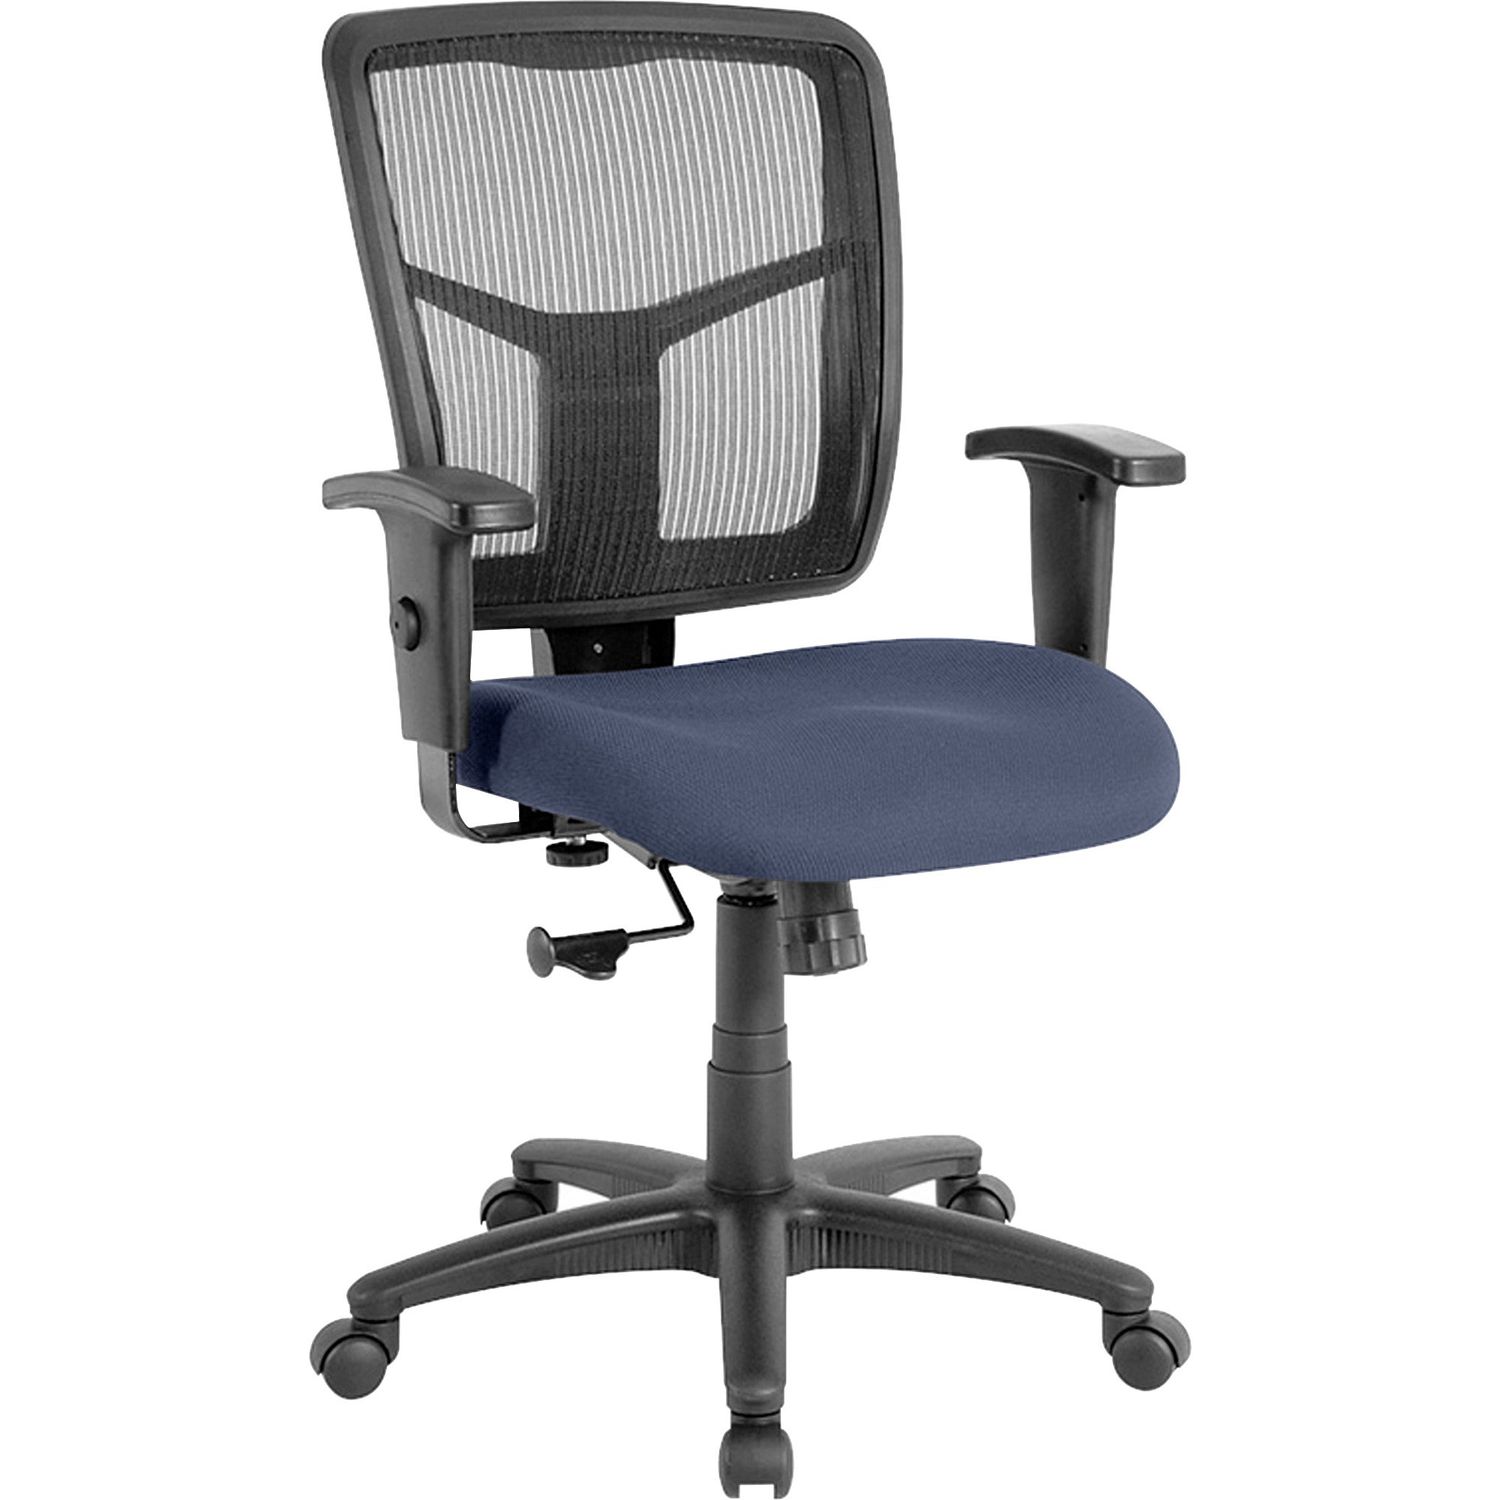 Managerial Mesh Mid-back Chair Fabric Seat, Black Frame, Mid Back, 5-star Base, Blue, Ocean, 1 Each